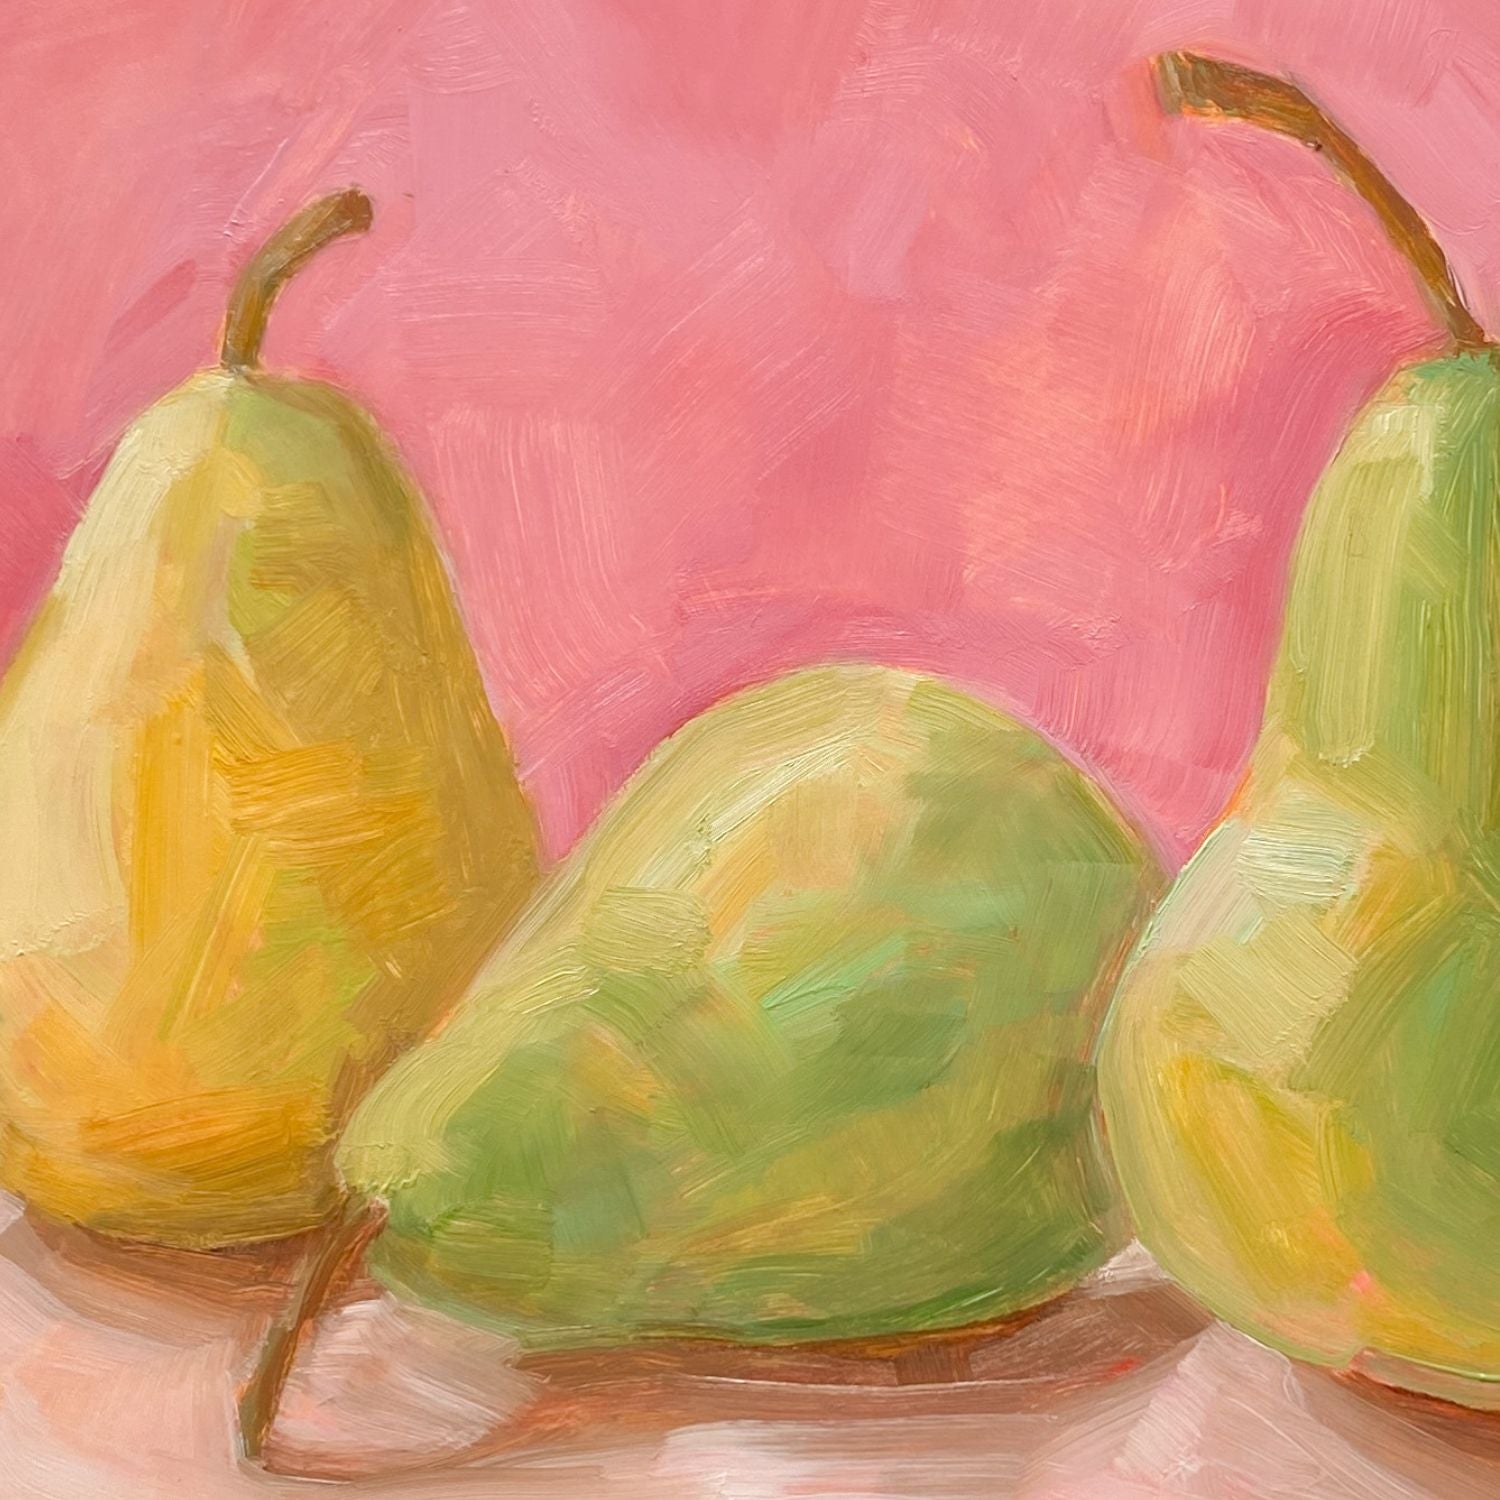 closeup of an image of an oil painting of two green pears and one yellow pear on a cream surface with a soft and warm pink background